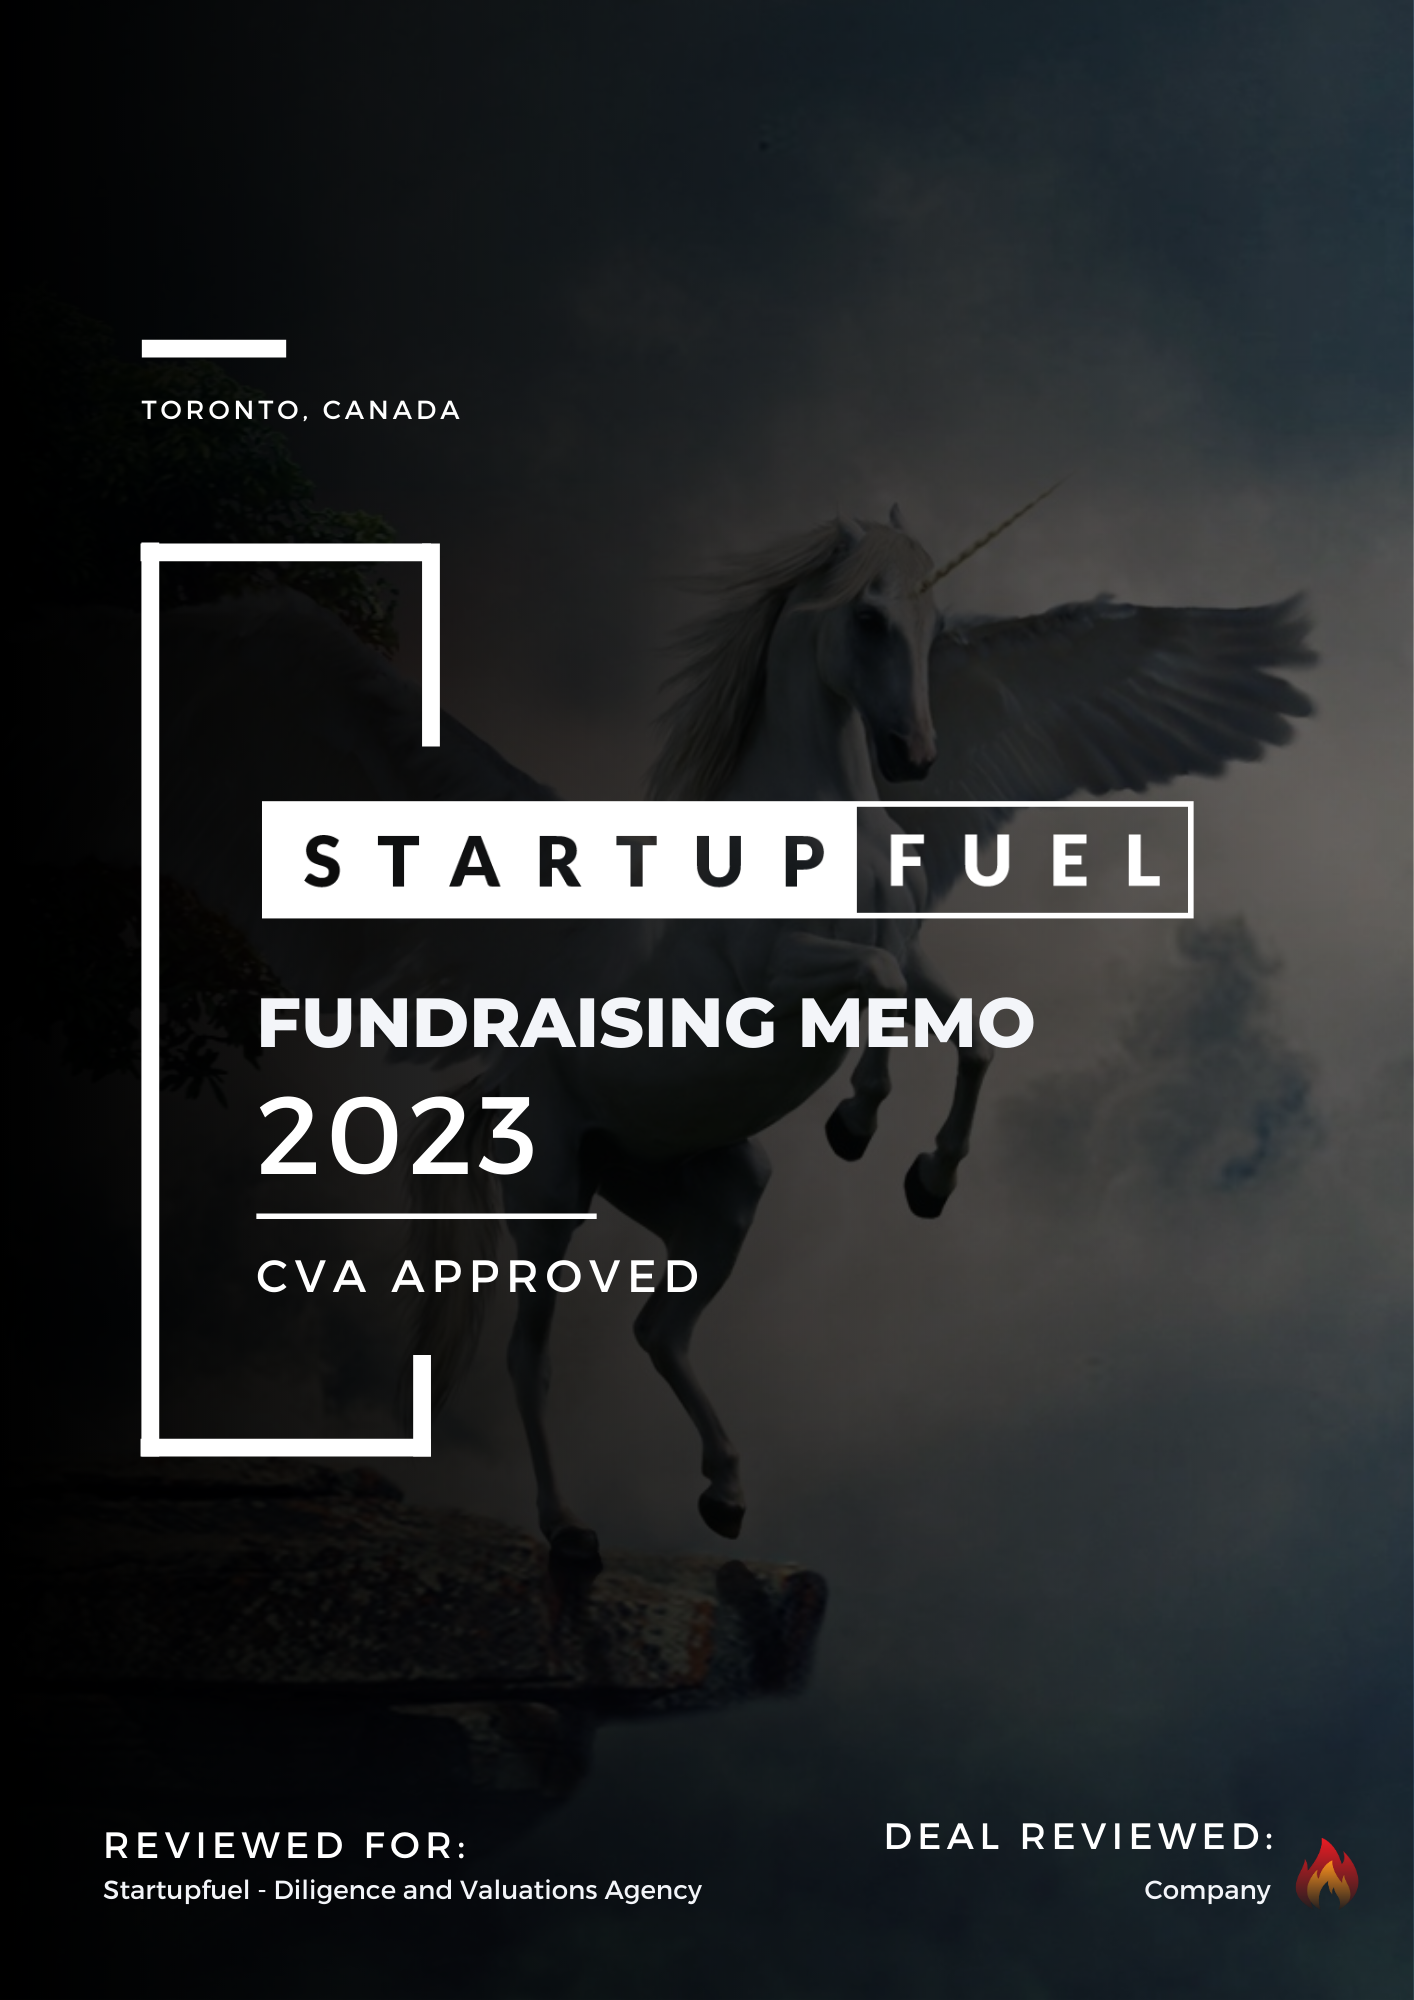 Startup Fundraising Memo- Level 2 Due Diligence